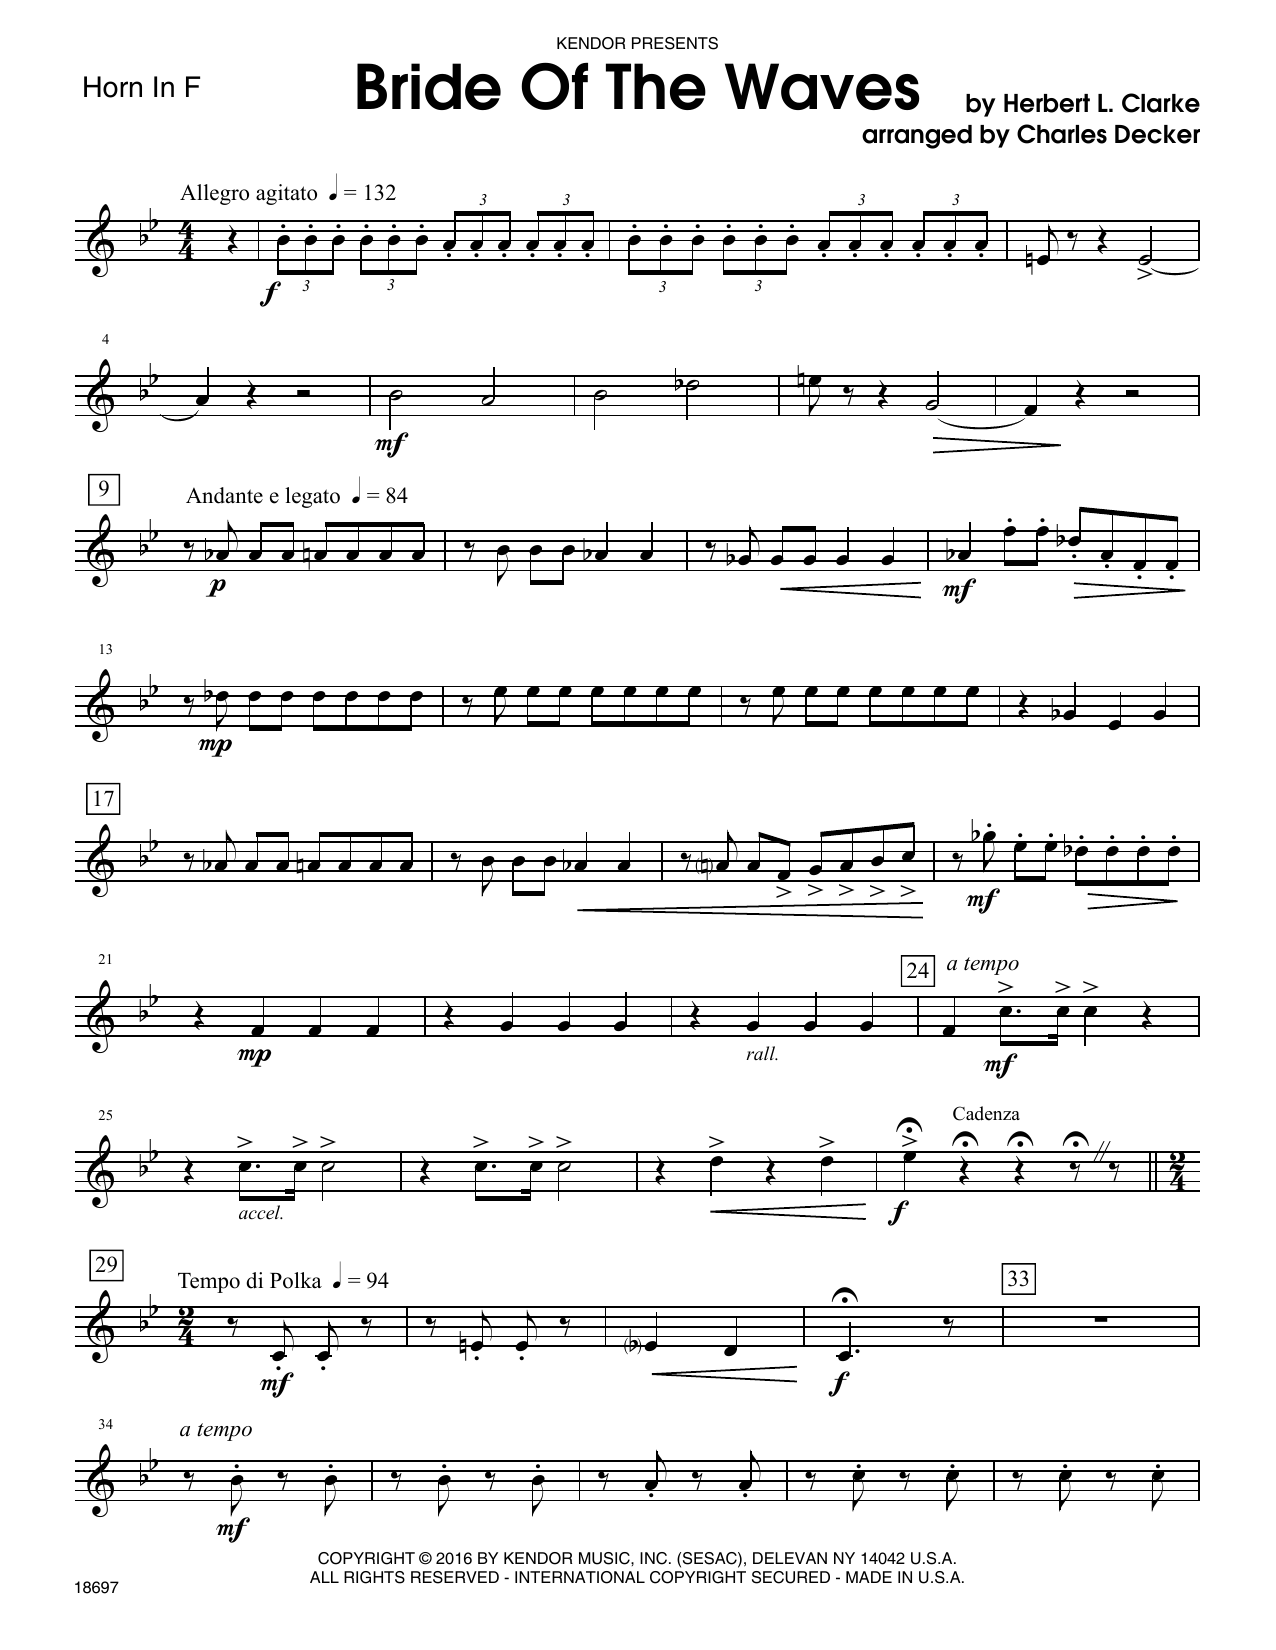 Download Decker Bride Of The Waves - Horn in F Sheet Music